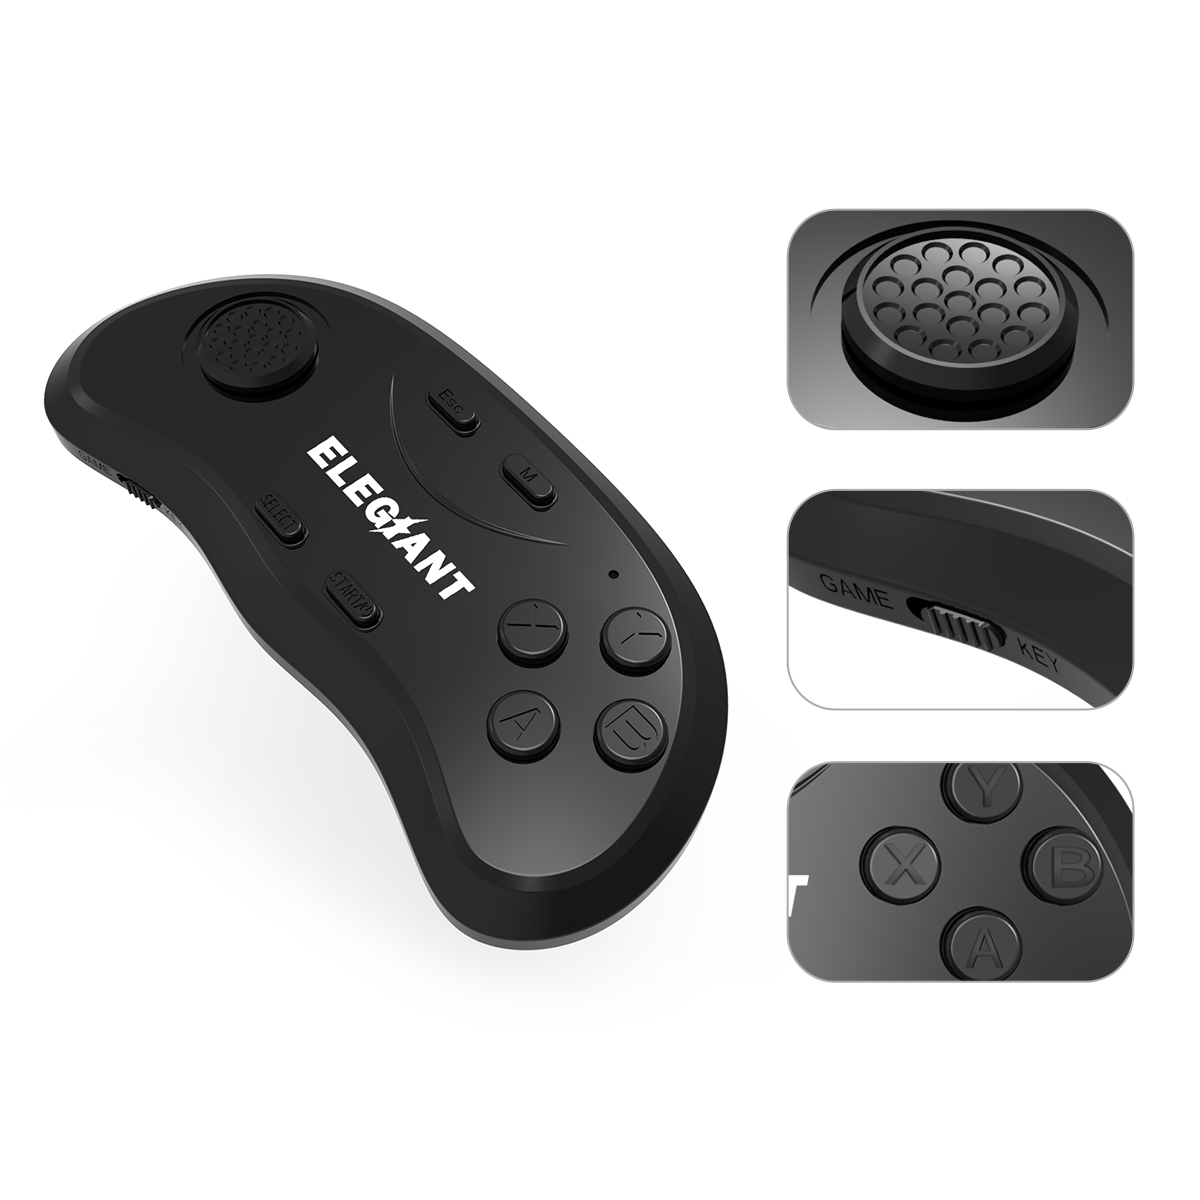 Find ELEGIANT 2 Generation bluetooth 3 0 VR Glasses Remote Control Gamepad For Android IOS PC for Sale on Gipsybee.com with cryptocurrencies